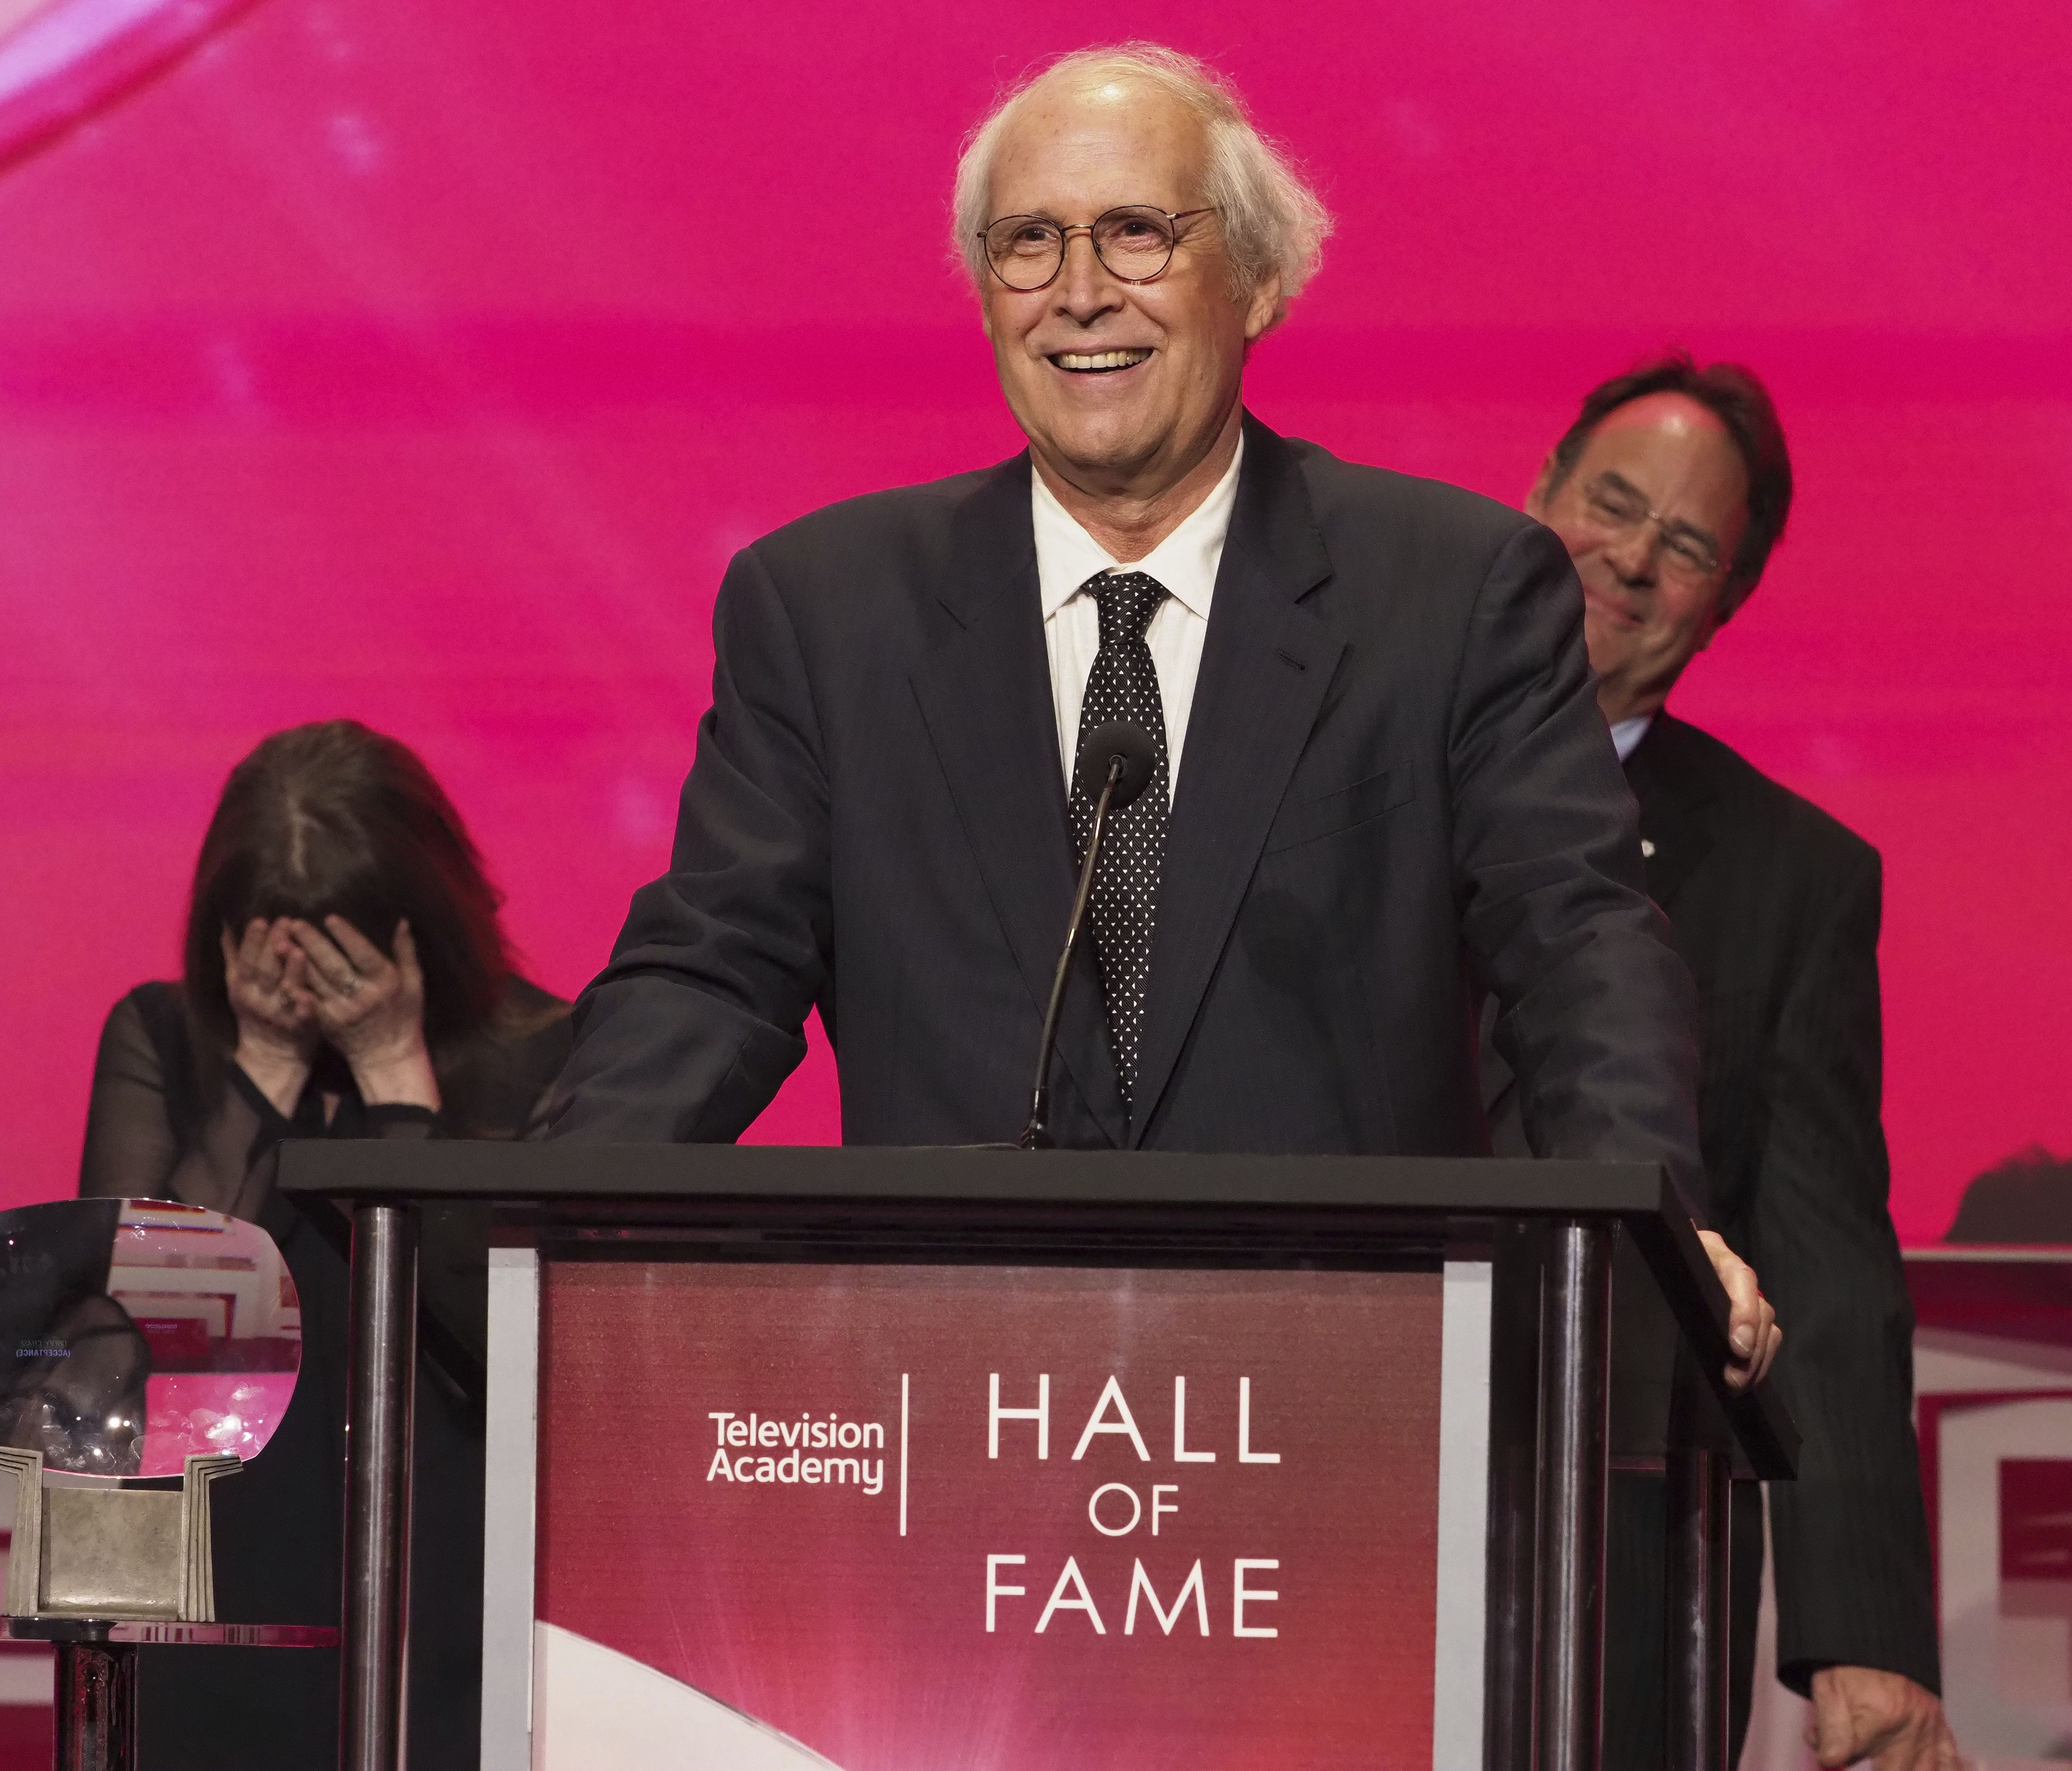 Chevy Chase was inducted into the Television Academy Hall of Fame in November.